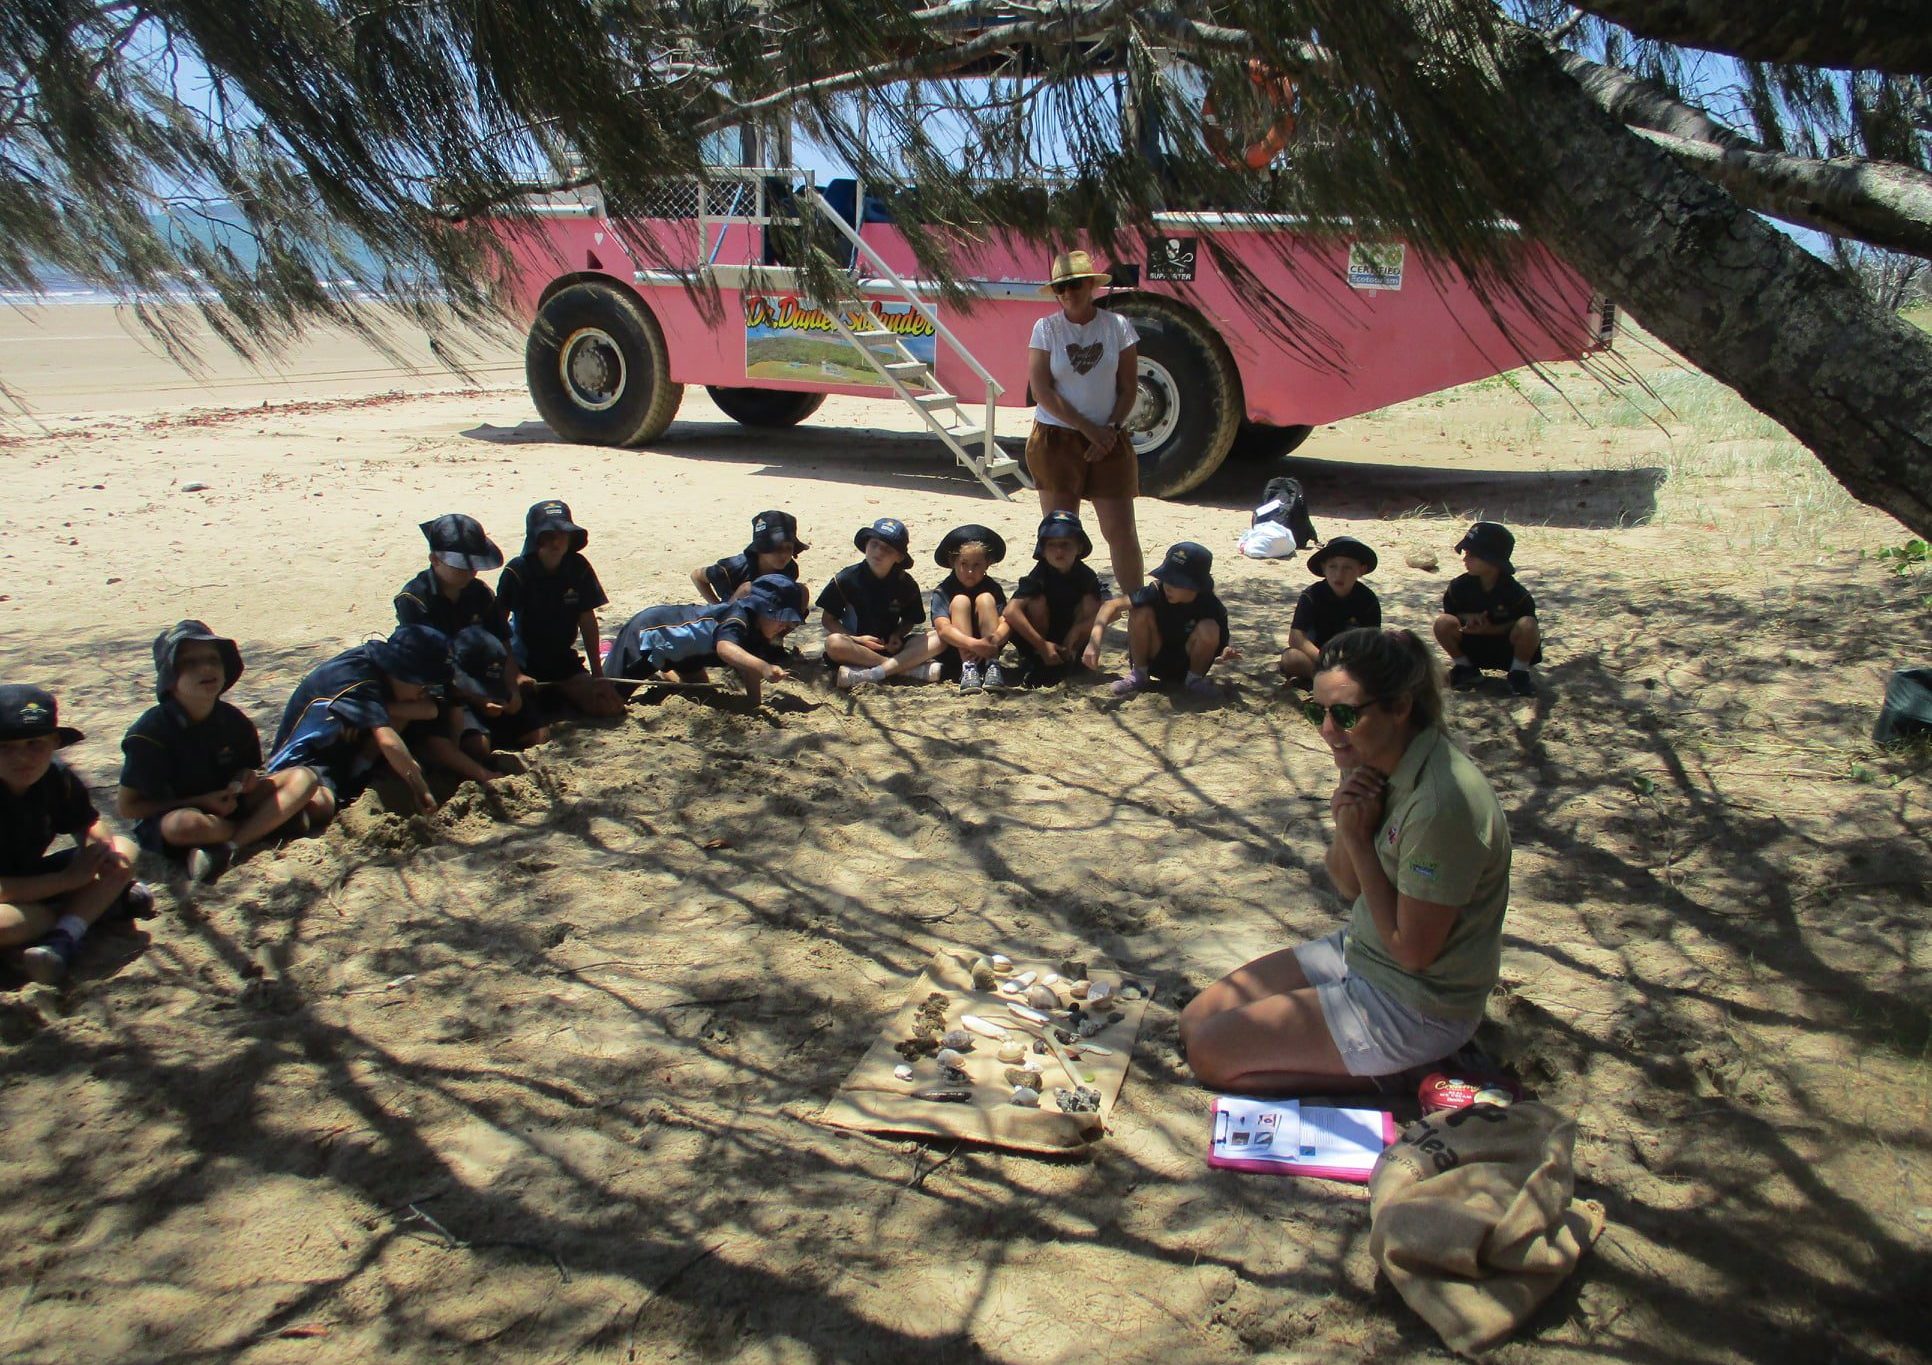 A group of school children sit on the beach in a circle , under the shade of some casurina trees. They listen to the LARC tour guide who has native flora examples laid on the ground to show the children. The LARC is parked behind them.